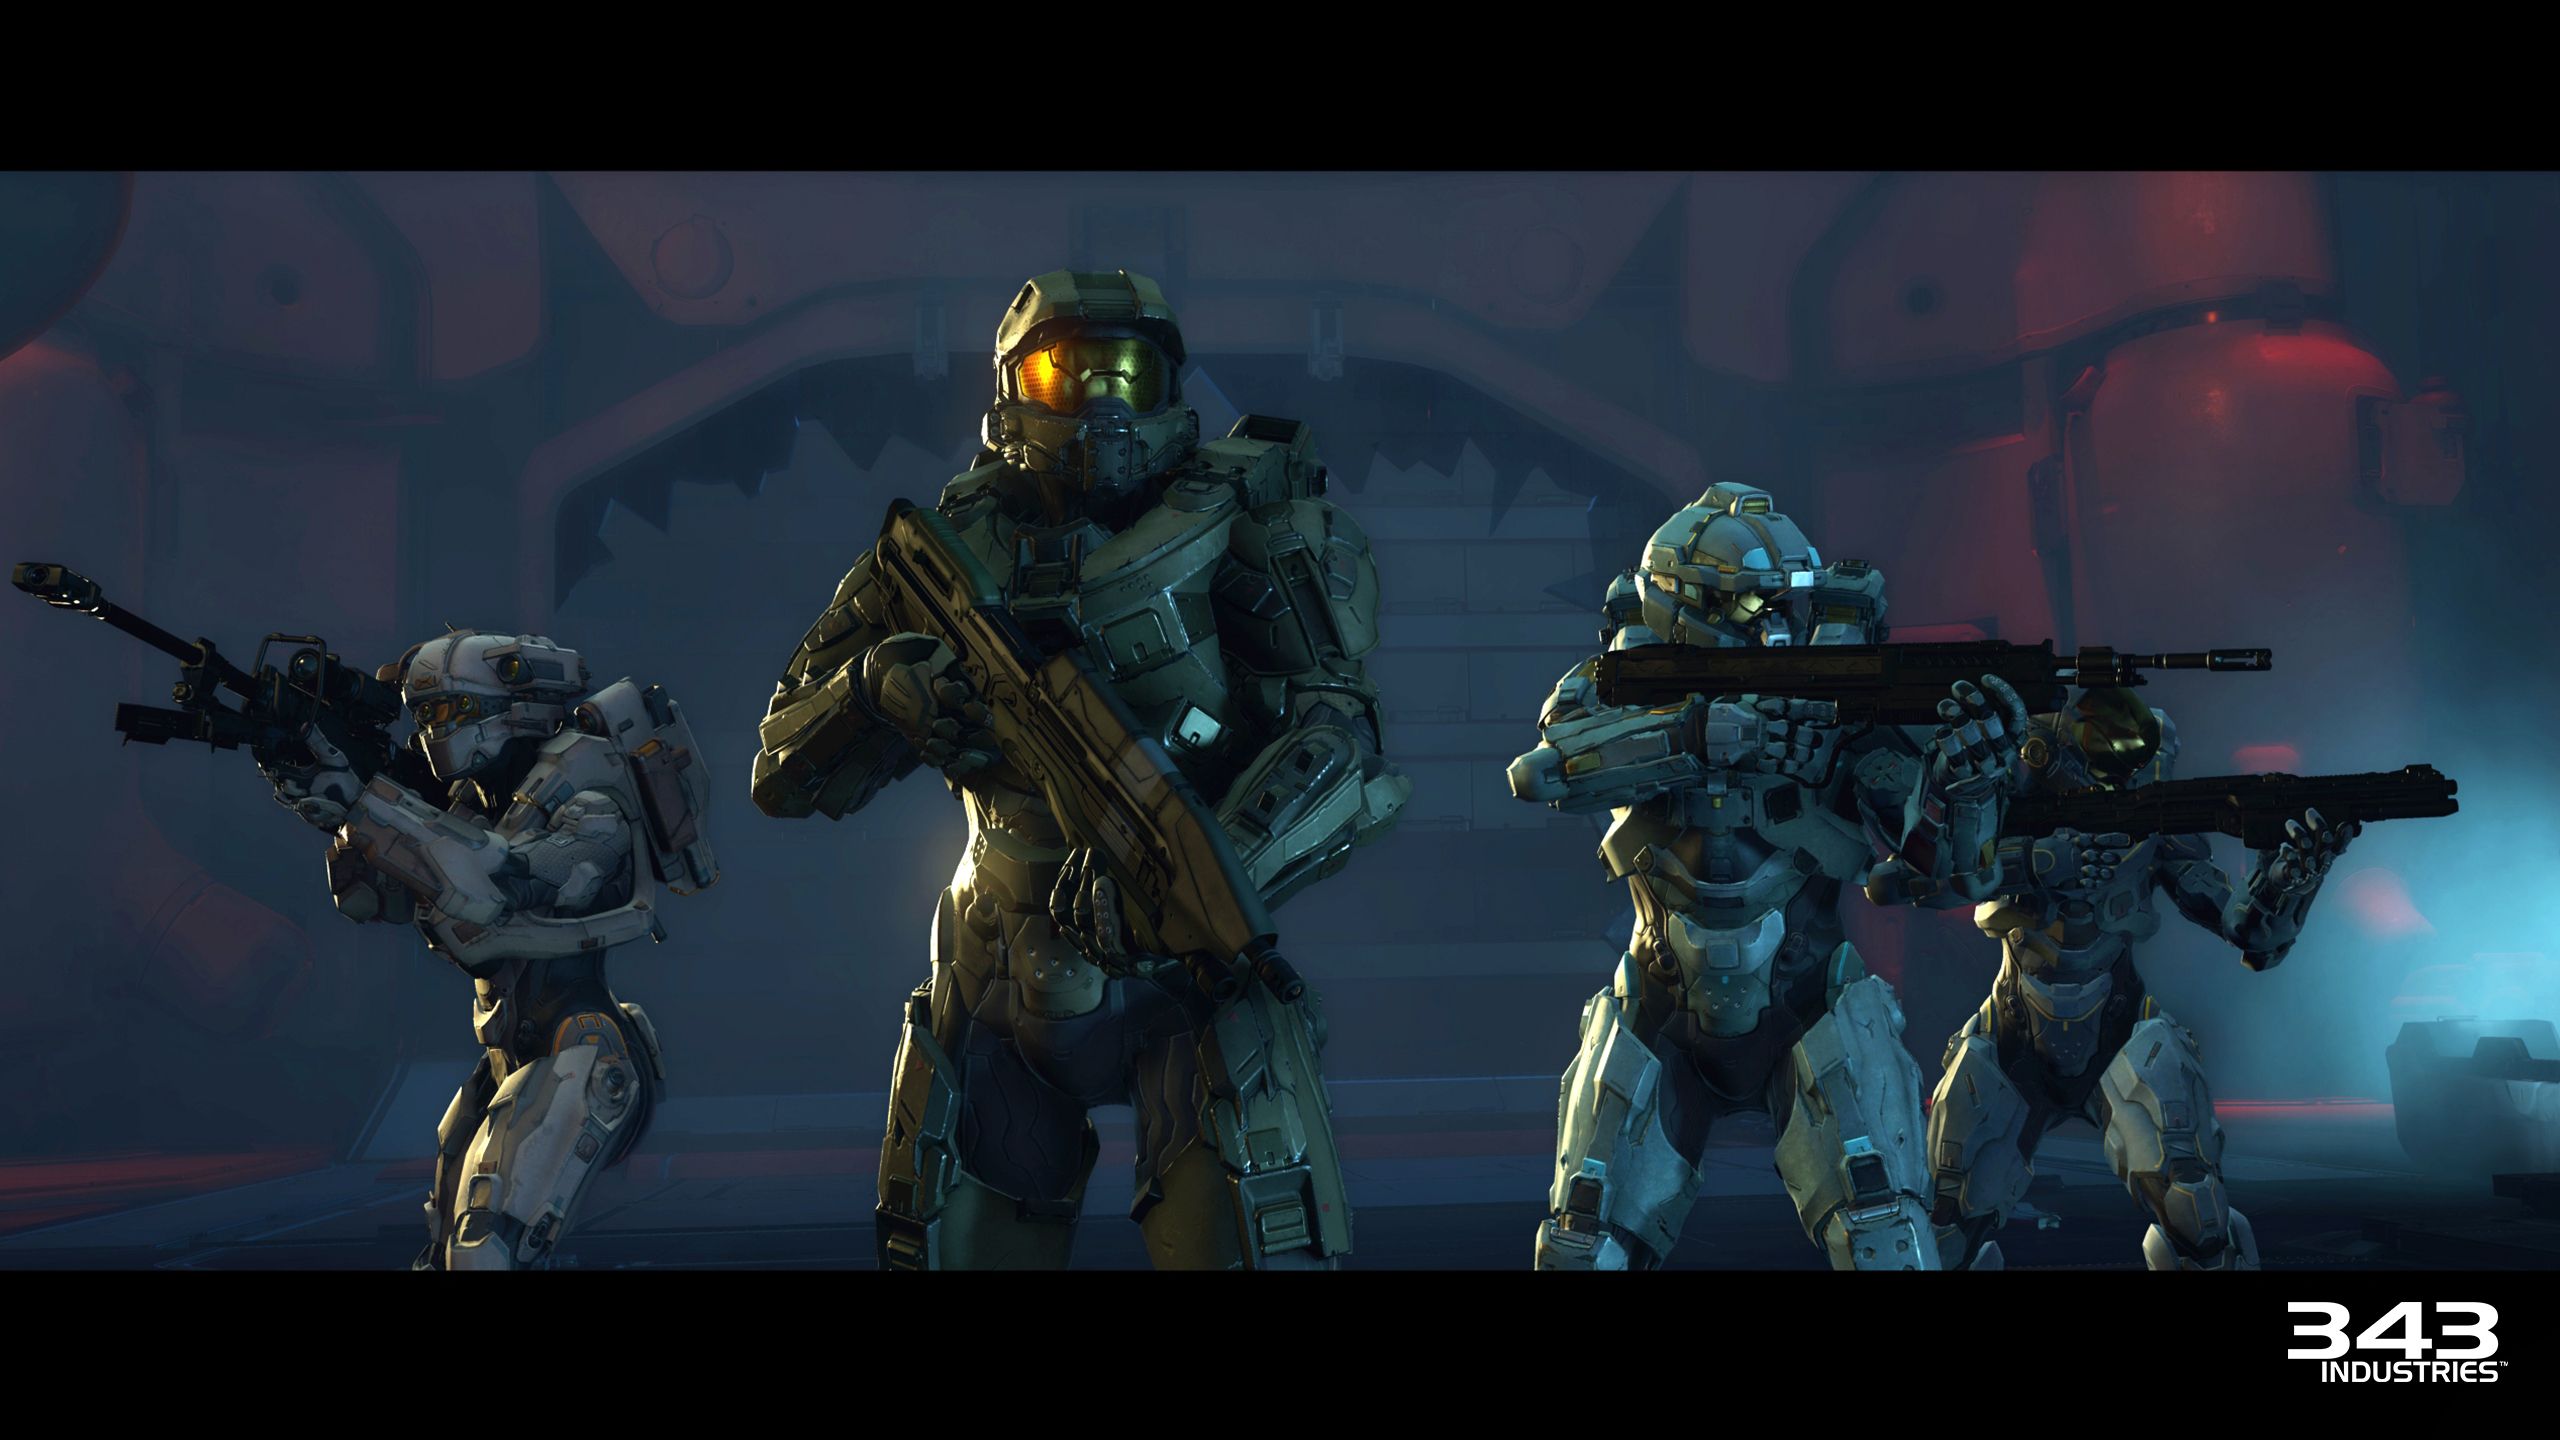 Halo 5: Guardians Launch Trailer Arrives, With Muse